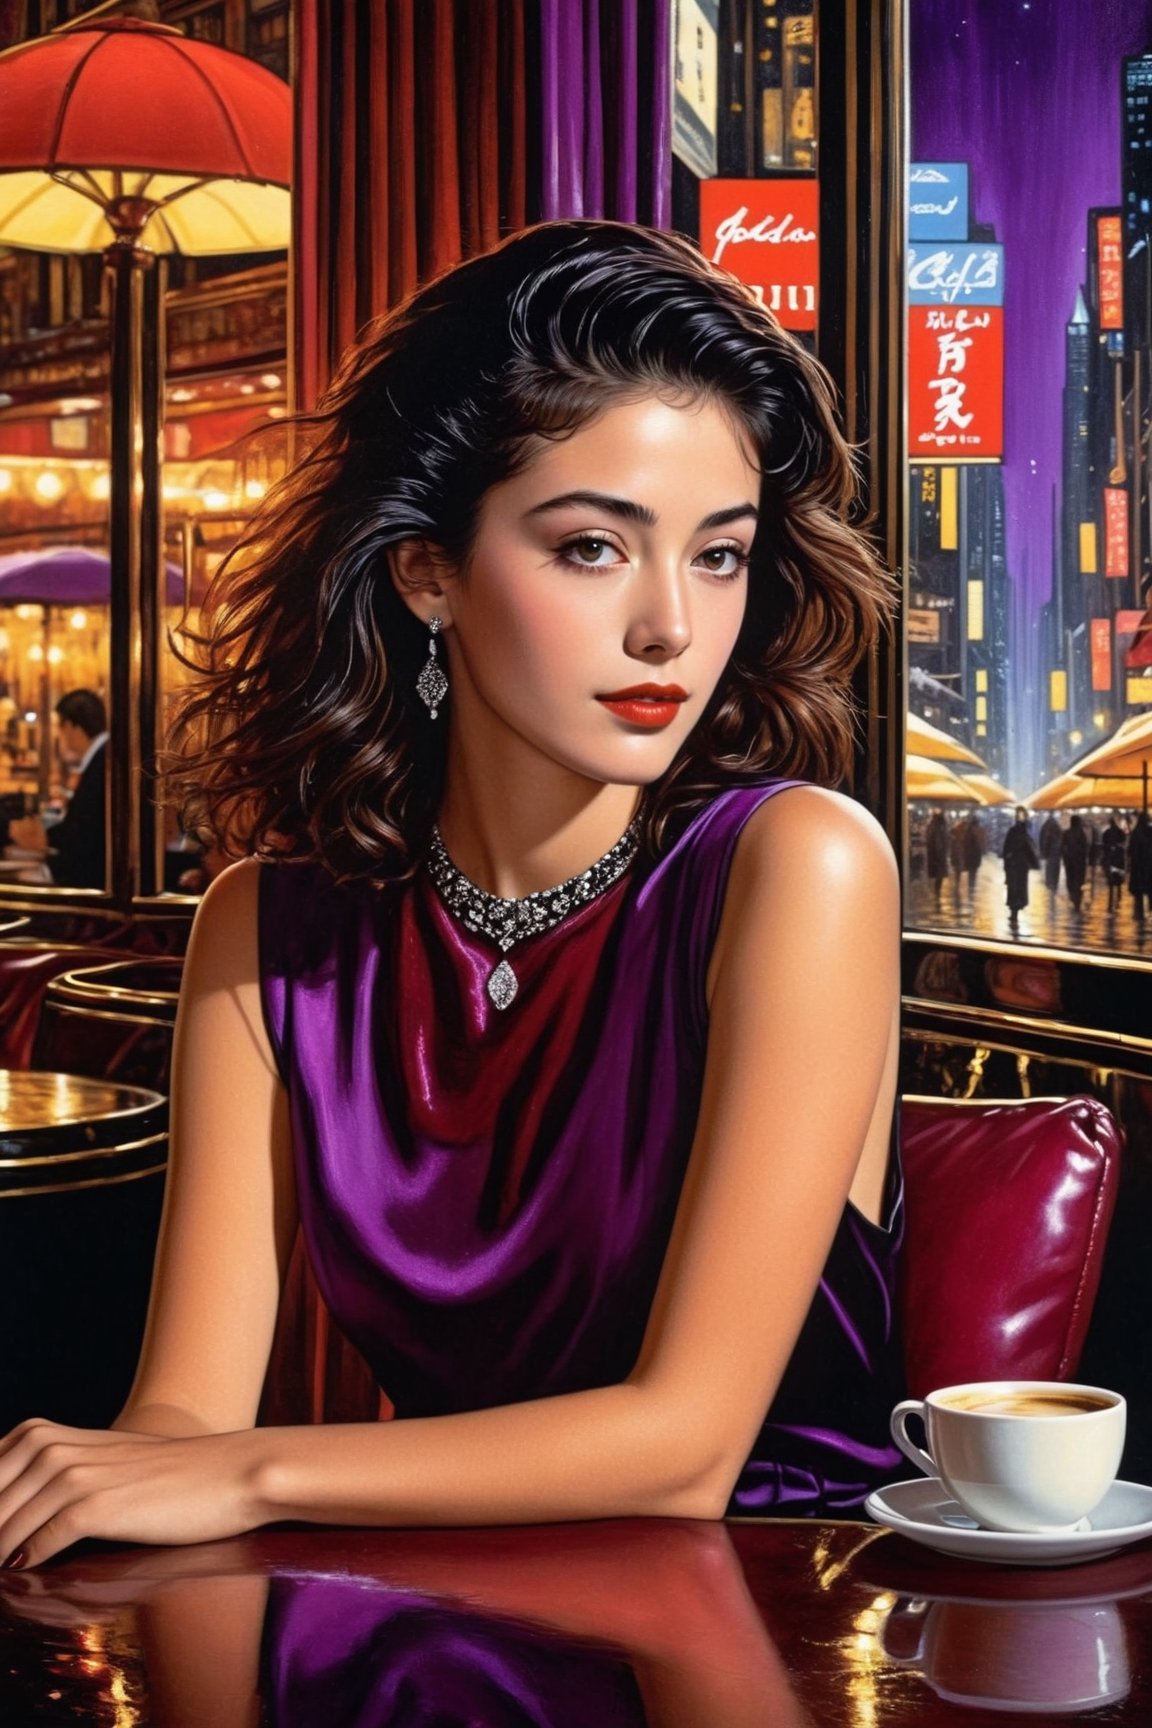 Hyper-Realistic photo of a girl sitting in a cafe at night,20yo,1girl,solo,Sean Young \(in Blade Runner\),detailed exquisite face,detailed soft shiny skin,lips,smile,perfect female form,looking at viewer,disheveled long black hair blowing,[Deep Purple and Wine Red color],elegant dress,chanel,prada,close up
BREAK
backdrop of beautiful city skyscrapers,table,coffee mug,vase,book
BREAK
(rule of thirds:1.3),perfect composition,studio photo,trending on artstation,depth of perspective,(Masterpiece,Best quality,32k,UHD:1.4),(sharp focus,high contrast,HDR,hyper-detailed,intricate details,ultra-realistic,award-winning photo,ultra-clear,kodachrome 800:1.3),(chiaroscuro lighting:1.3),by Antonio Lopez, Diego Koi, Karol Bak and Hayao Miyazaki,photo_b00ster, real_booster,art_booster